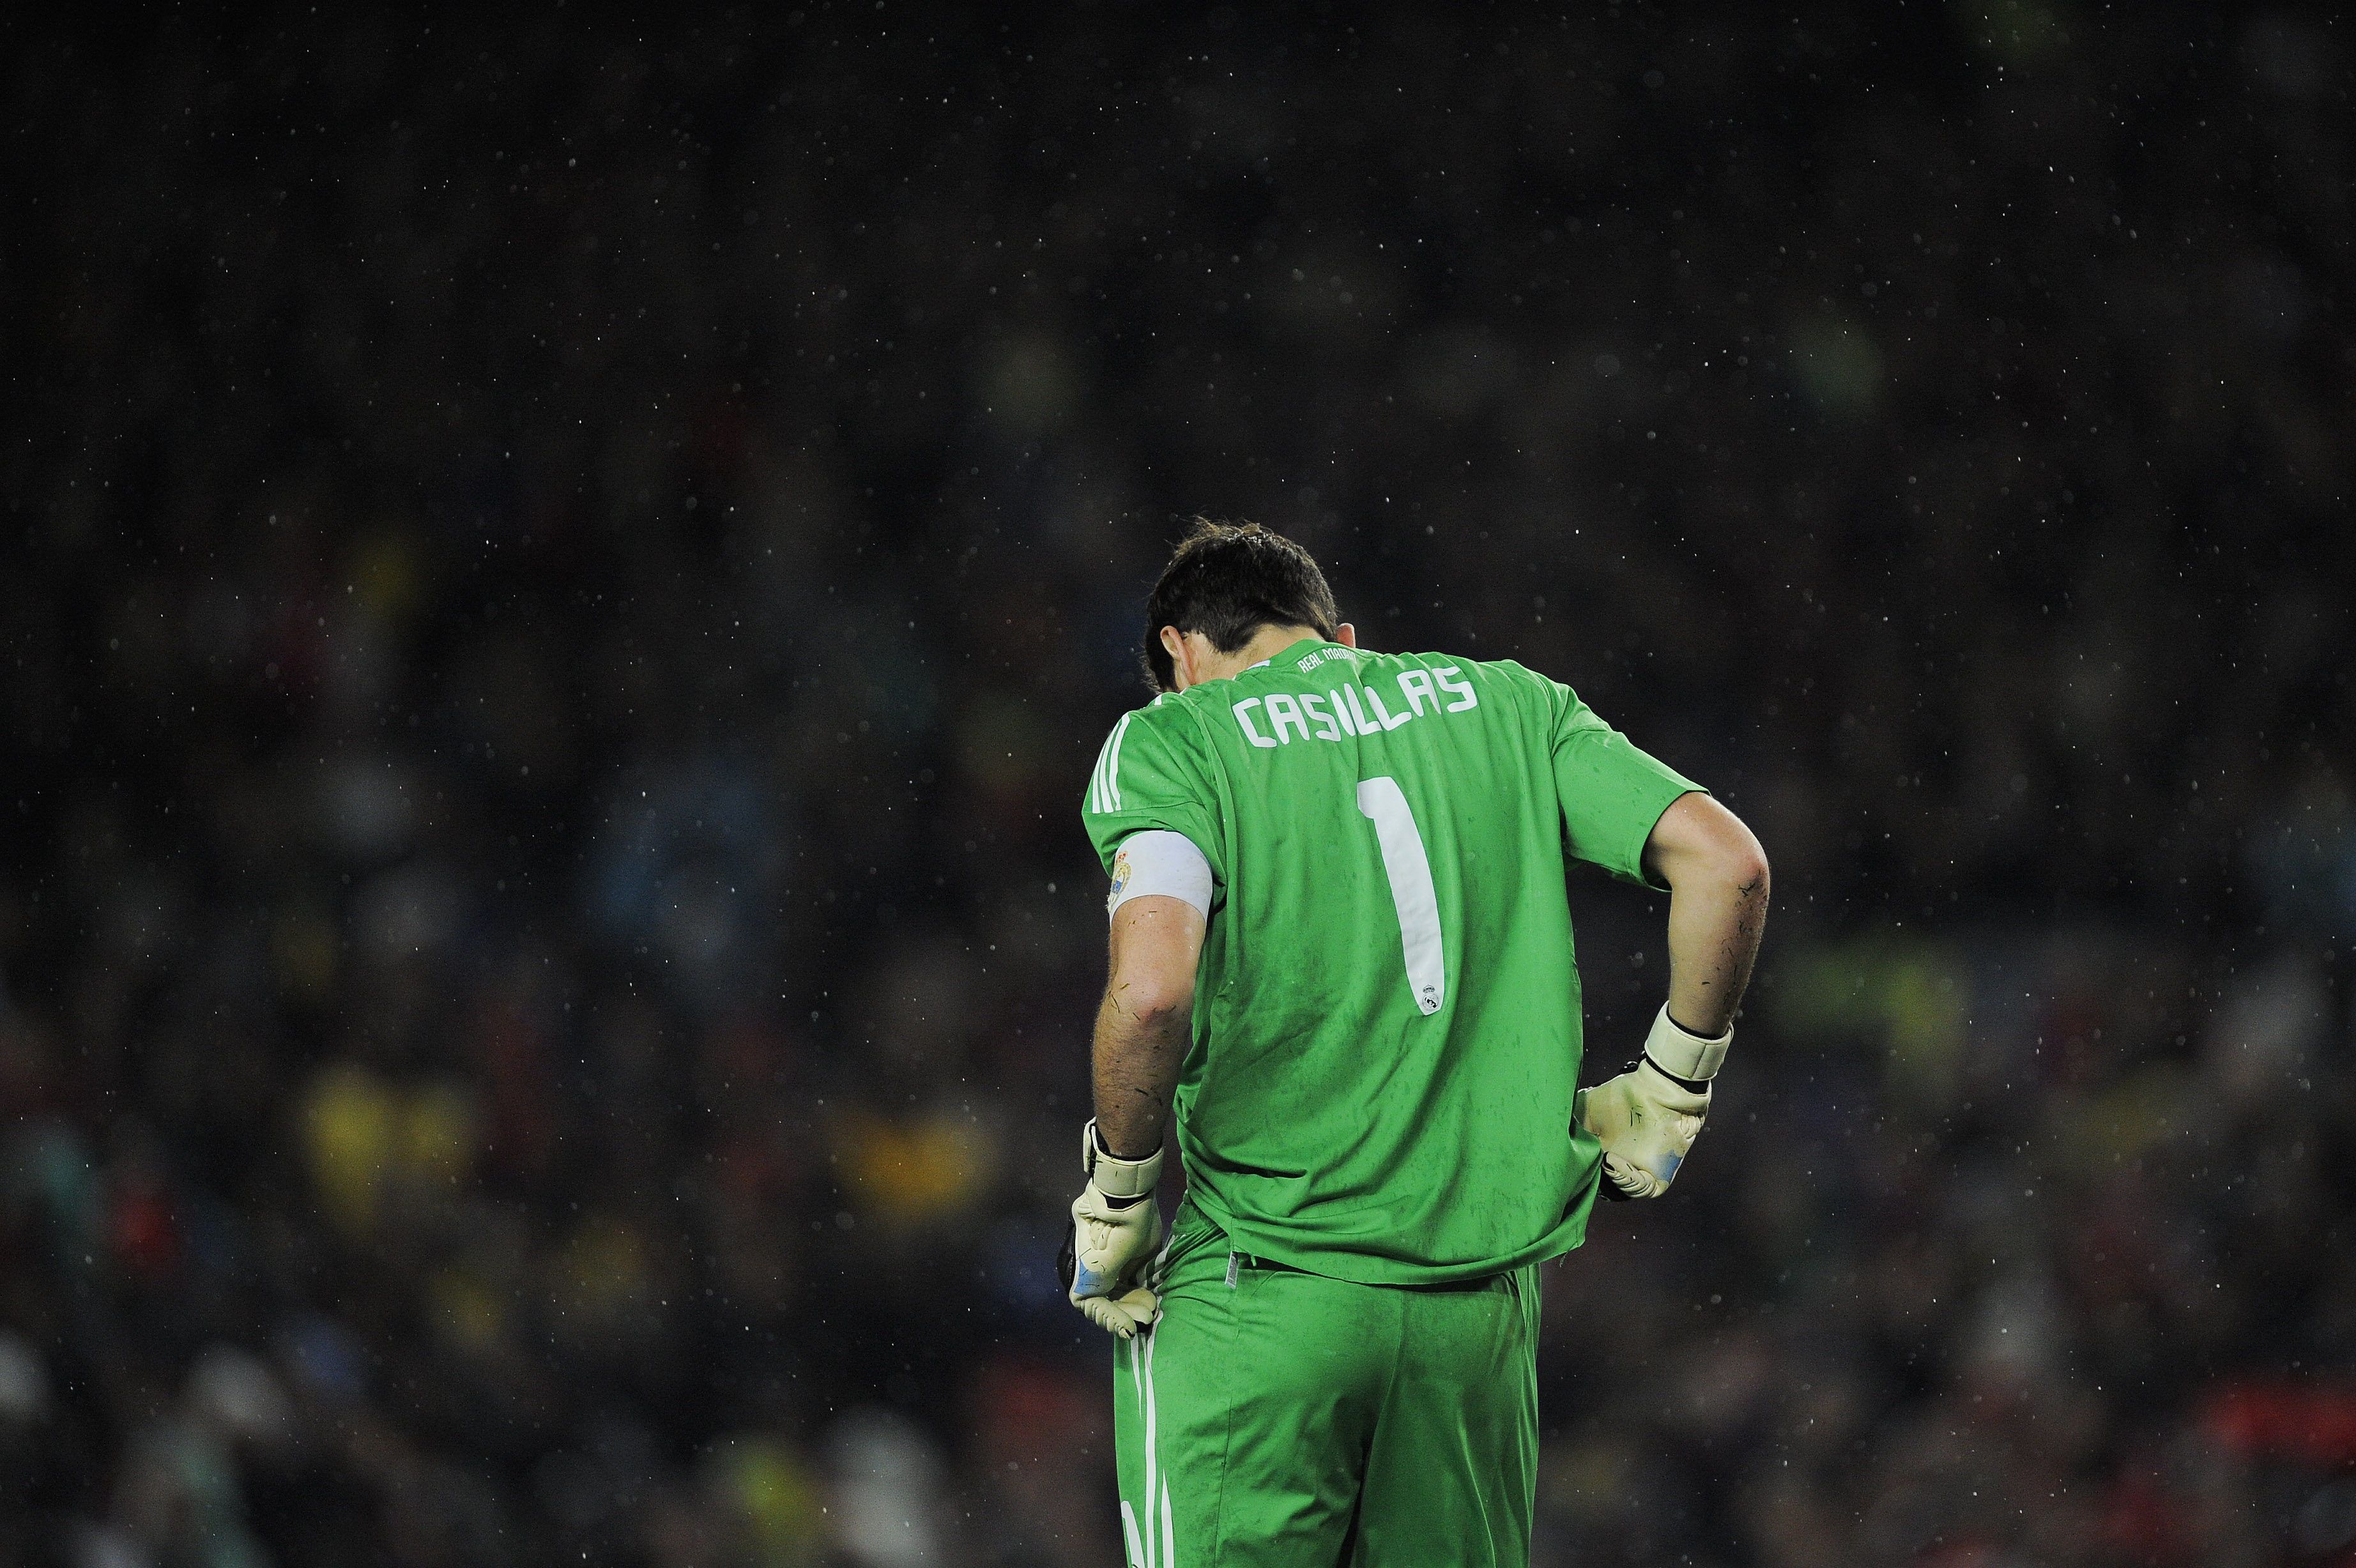 BARCELONA, SPAIN - NOVEMBER 29:  Iker Casillas of Real Madrid looks down after Pedro Rodriguez scored the second goal against Real Madrid during the La Liga match between Barcelona and Real Madrid at the Camp Nou Stadium on November 29, 2010 in Barcelona,